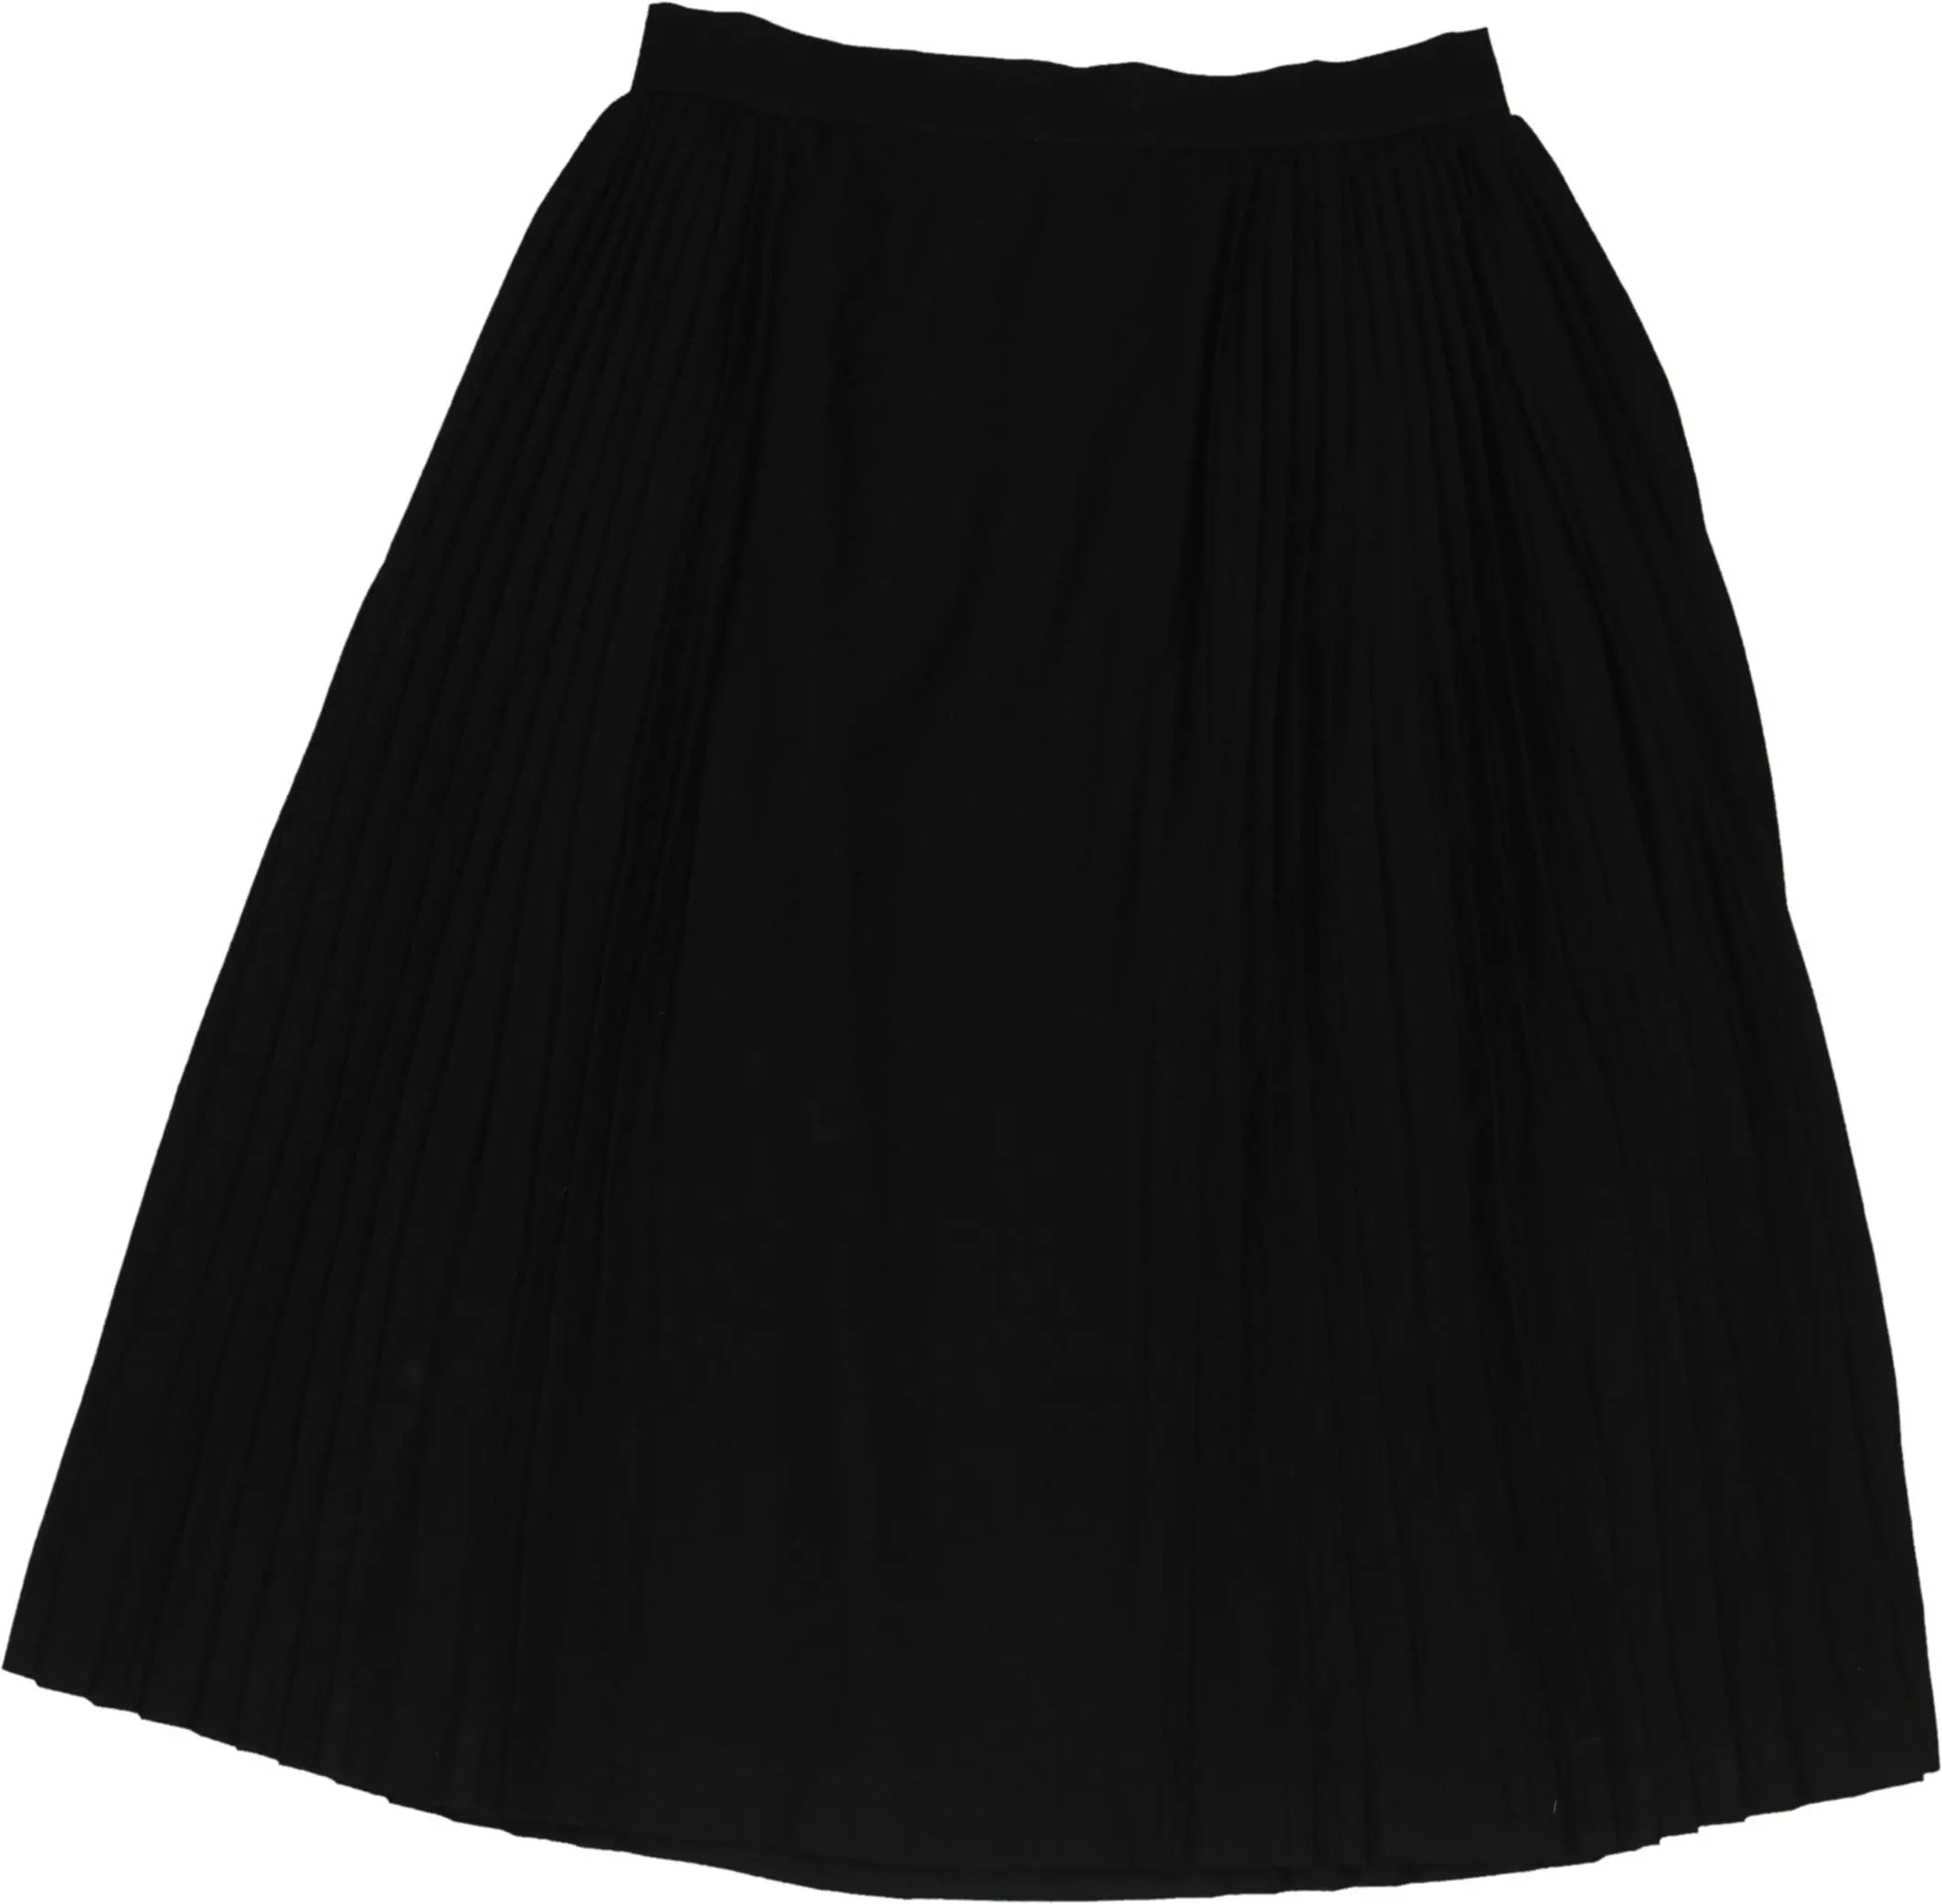 Unknown - Black pleated skirt- ThriftTale.com - Vintage and second handclothing